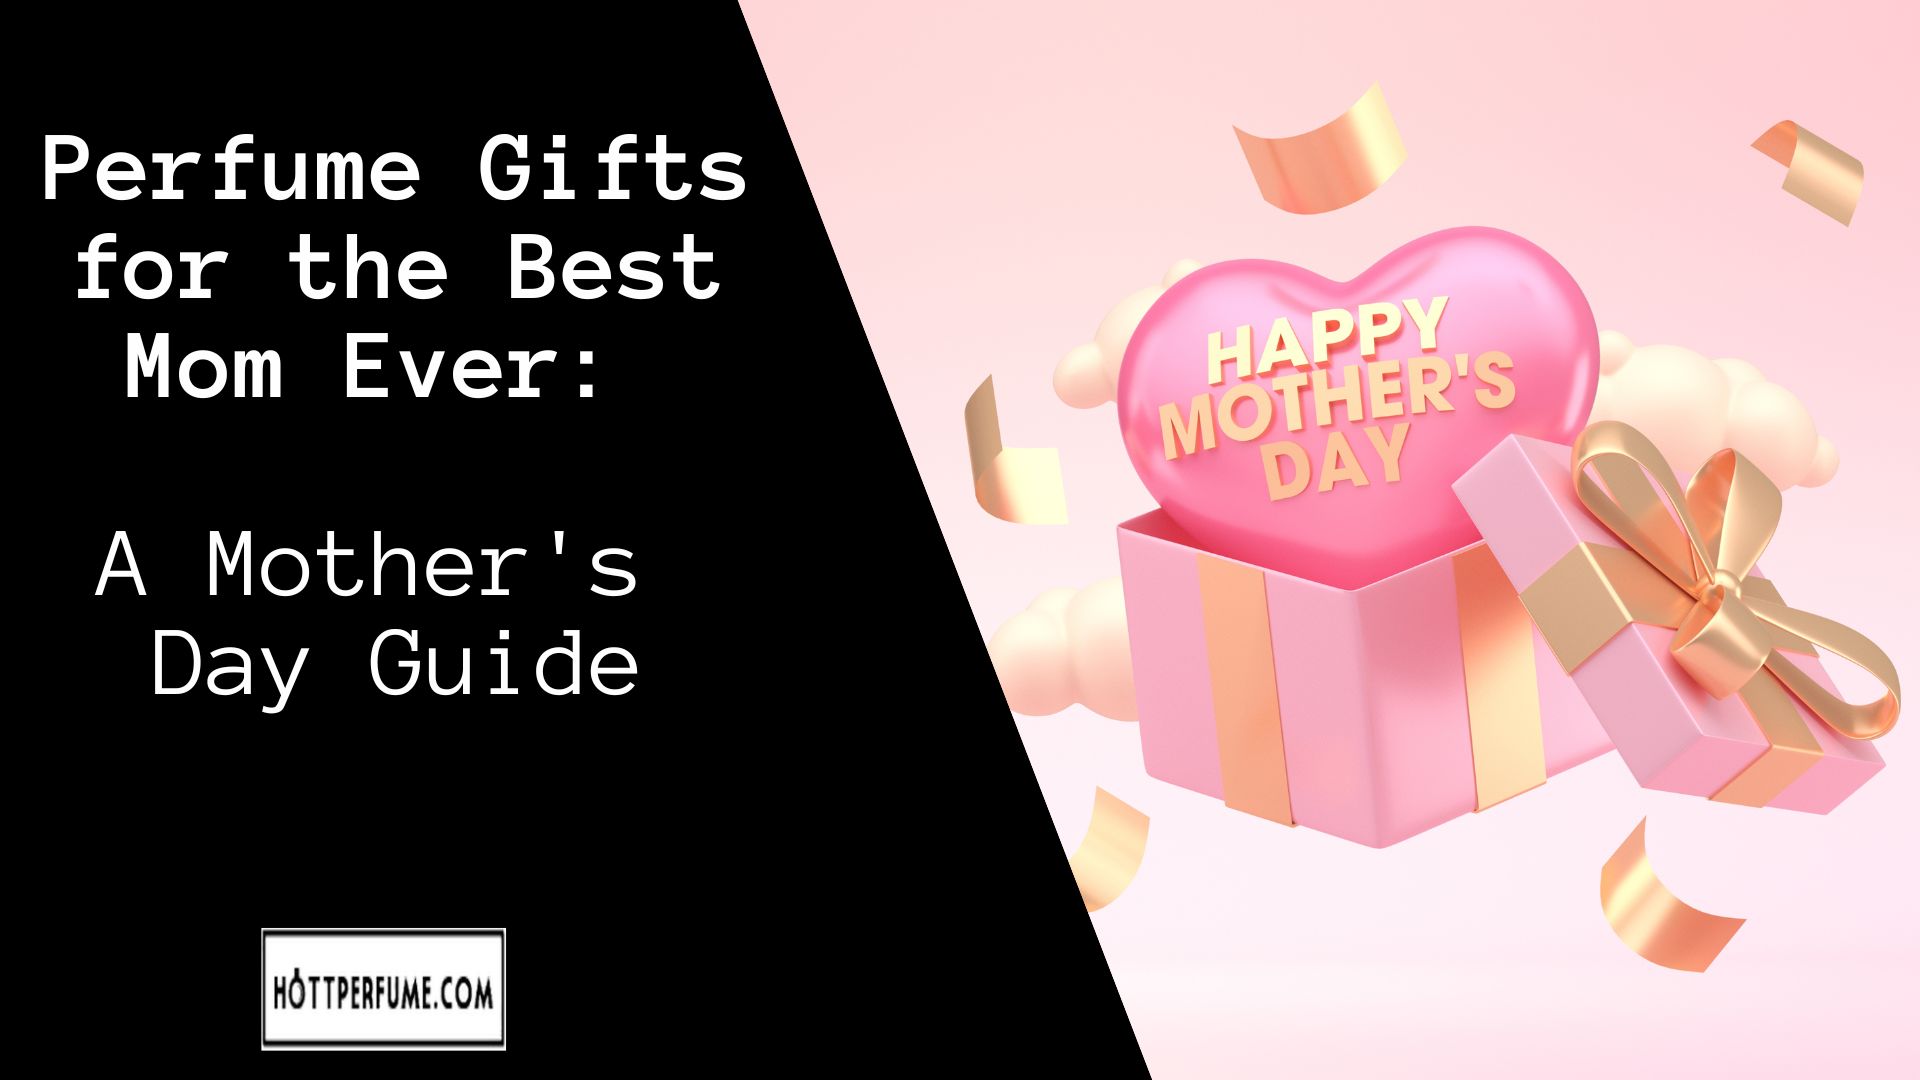 Perfume Gifts for the Best Mom Ever: A Mother's Day Guide - HottPerfume.com